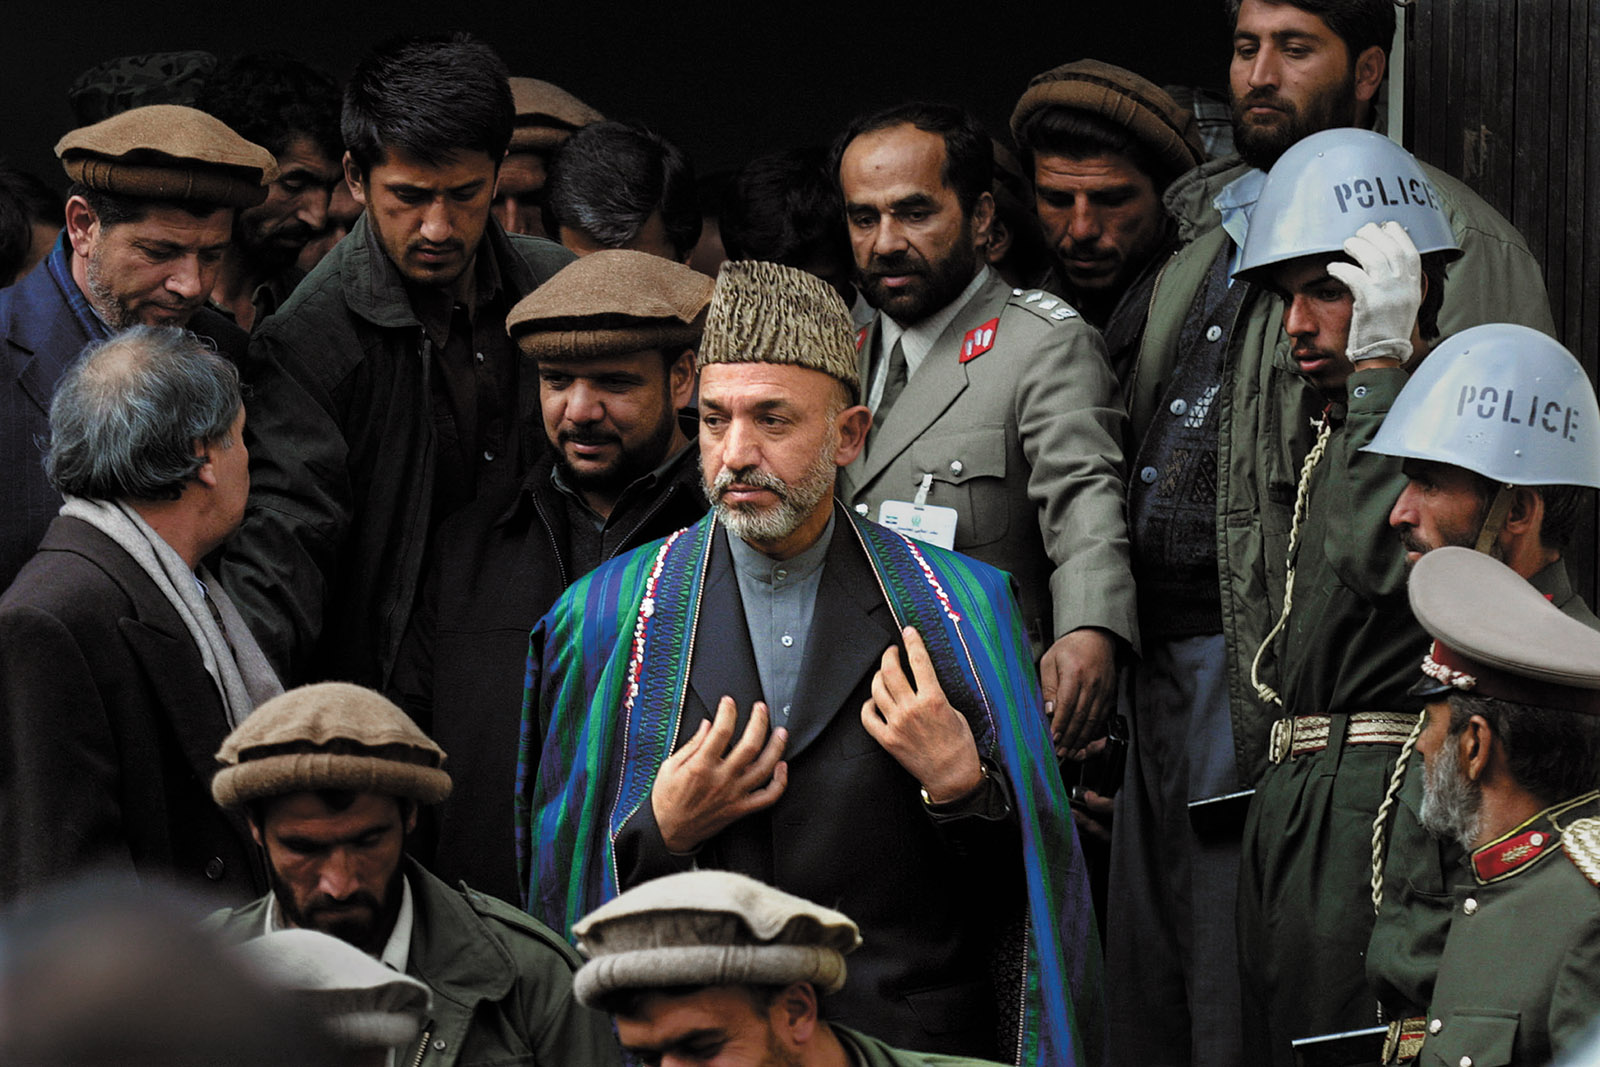 Hamid Karzai leaving the Interior Ministry after being sworn in as prime minister of Afghanistan’s interim government, Kabul, December 2001; photograph by Paula Bronstein from her book Afghanistan: Between Hope and Fear, just published by University of Texas Press